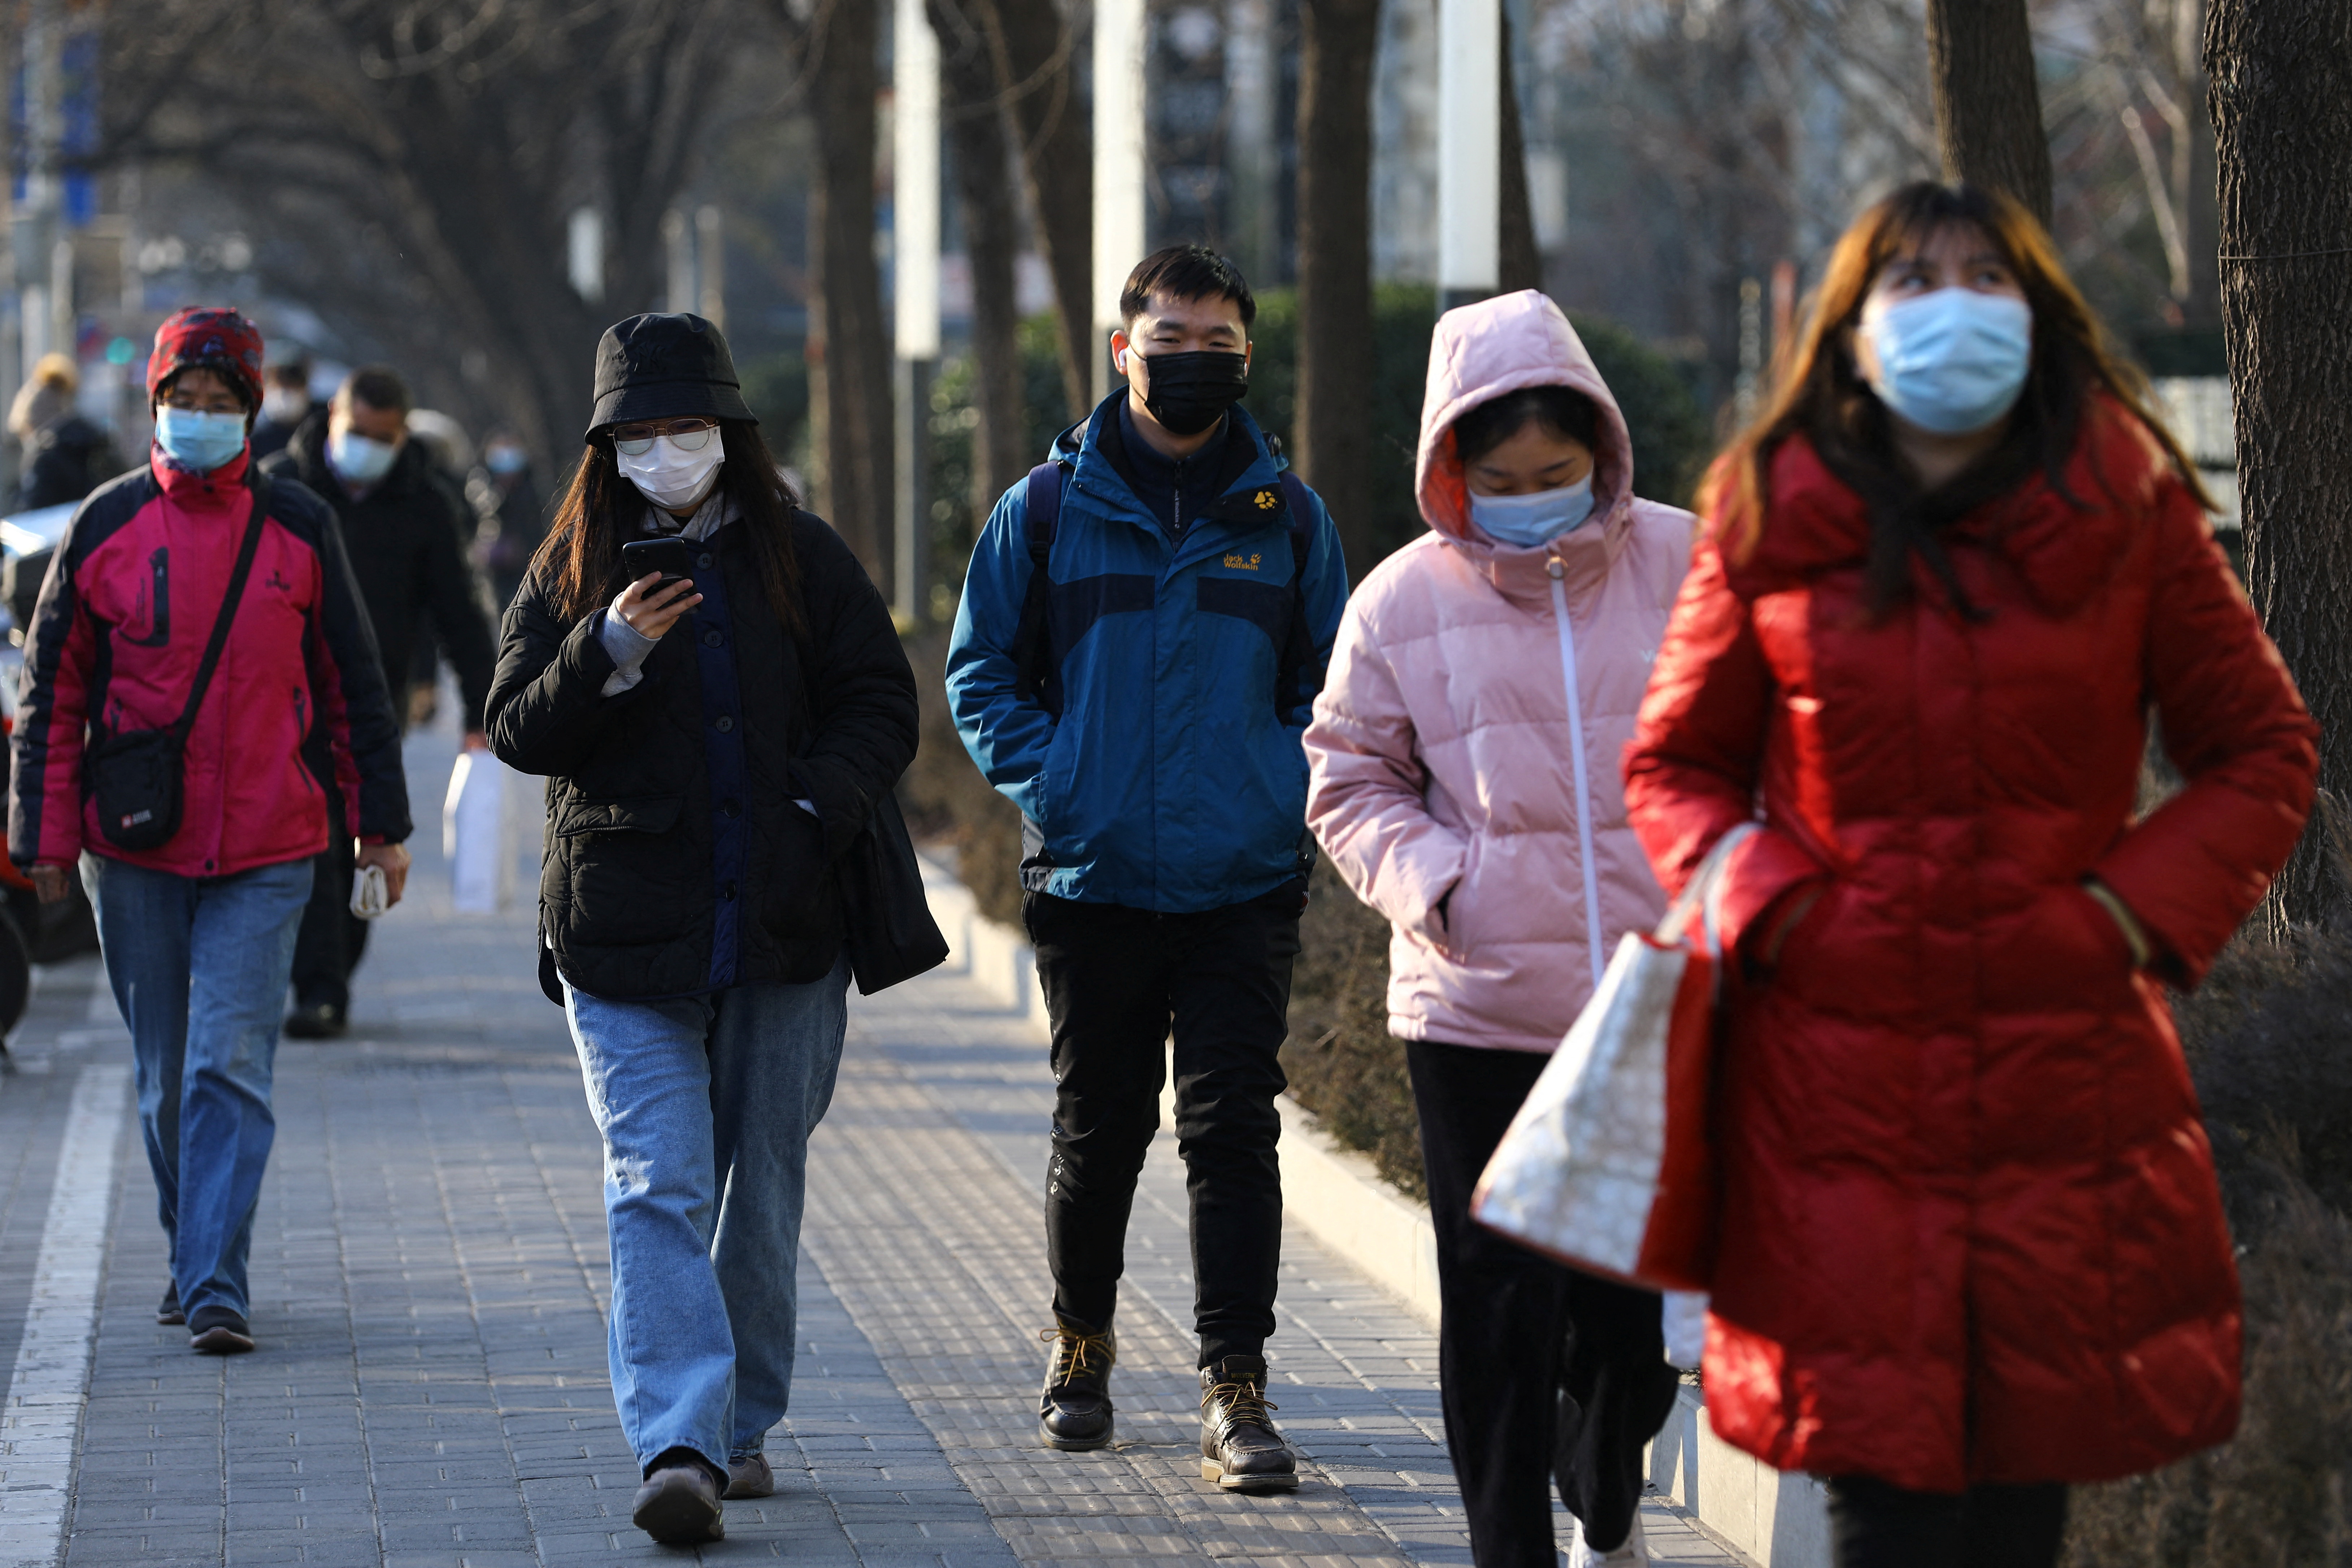 People wearing protective face masks walk on a street during morning rush hour as the COVID-19 pandemic continues in the country, in Beijing